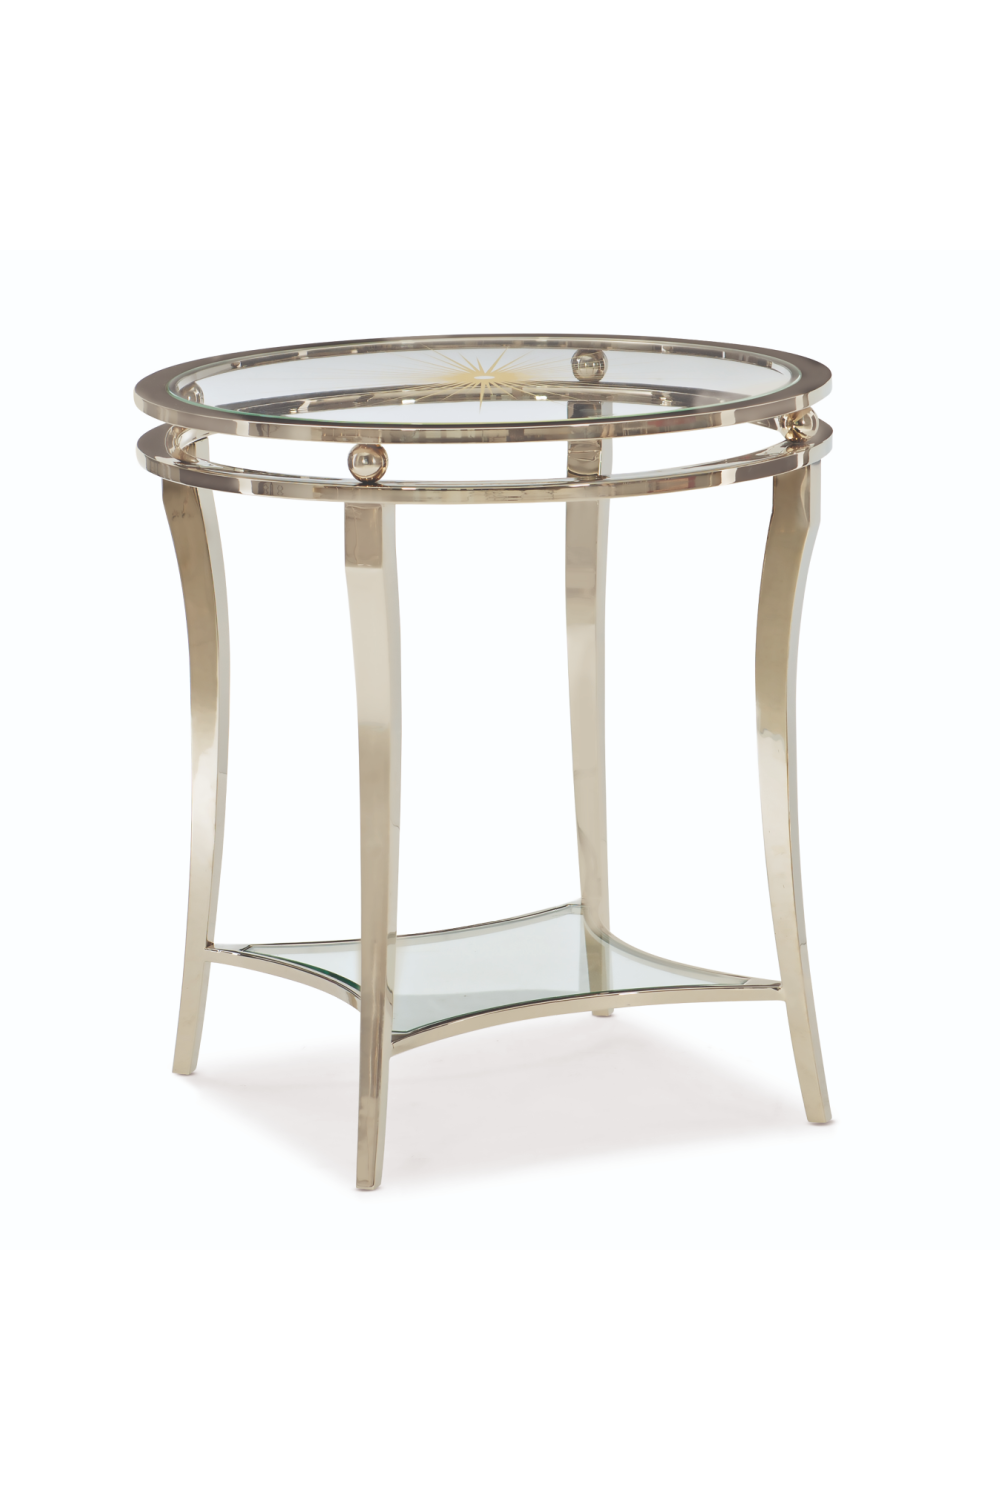 Starburst Patterned Side Table | Caracole Rising Star | Oroa.com